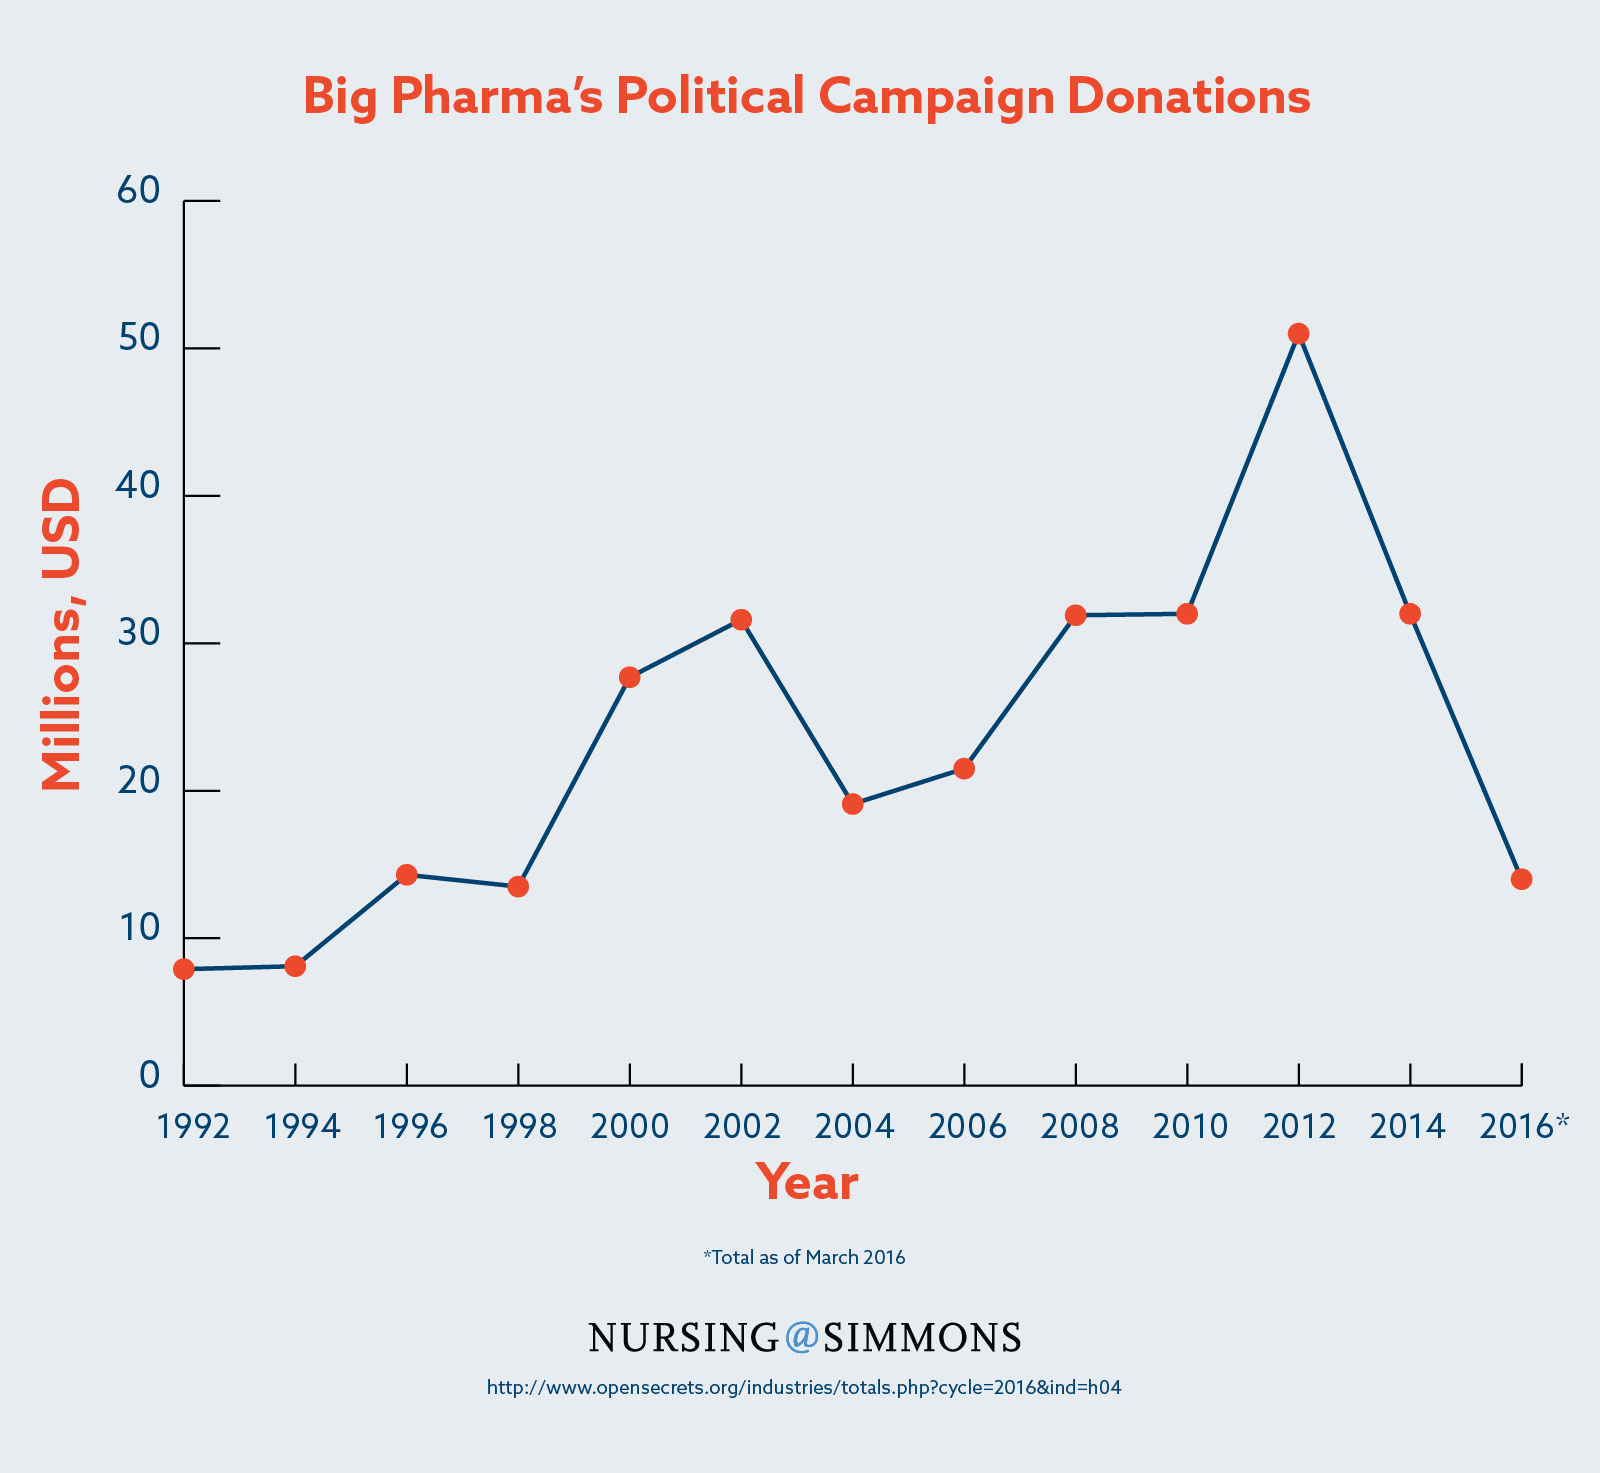 Line graph showing big pharma's political campaign donations over time.